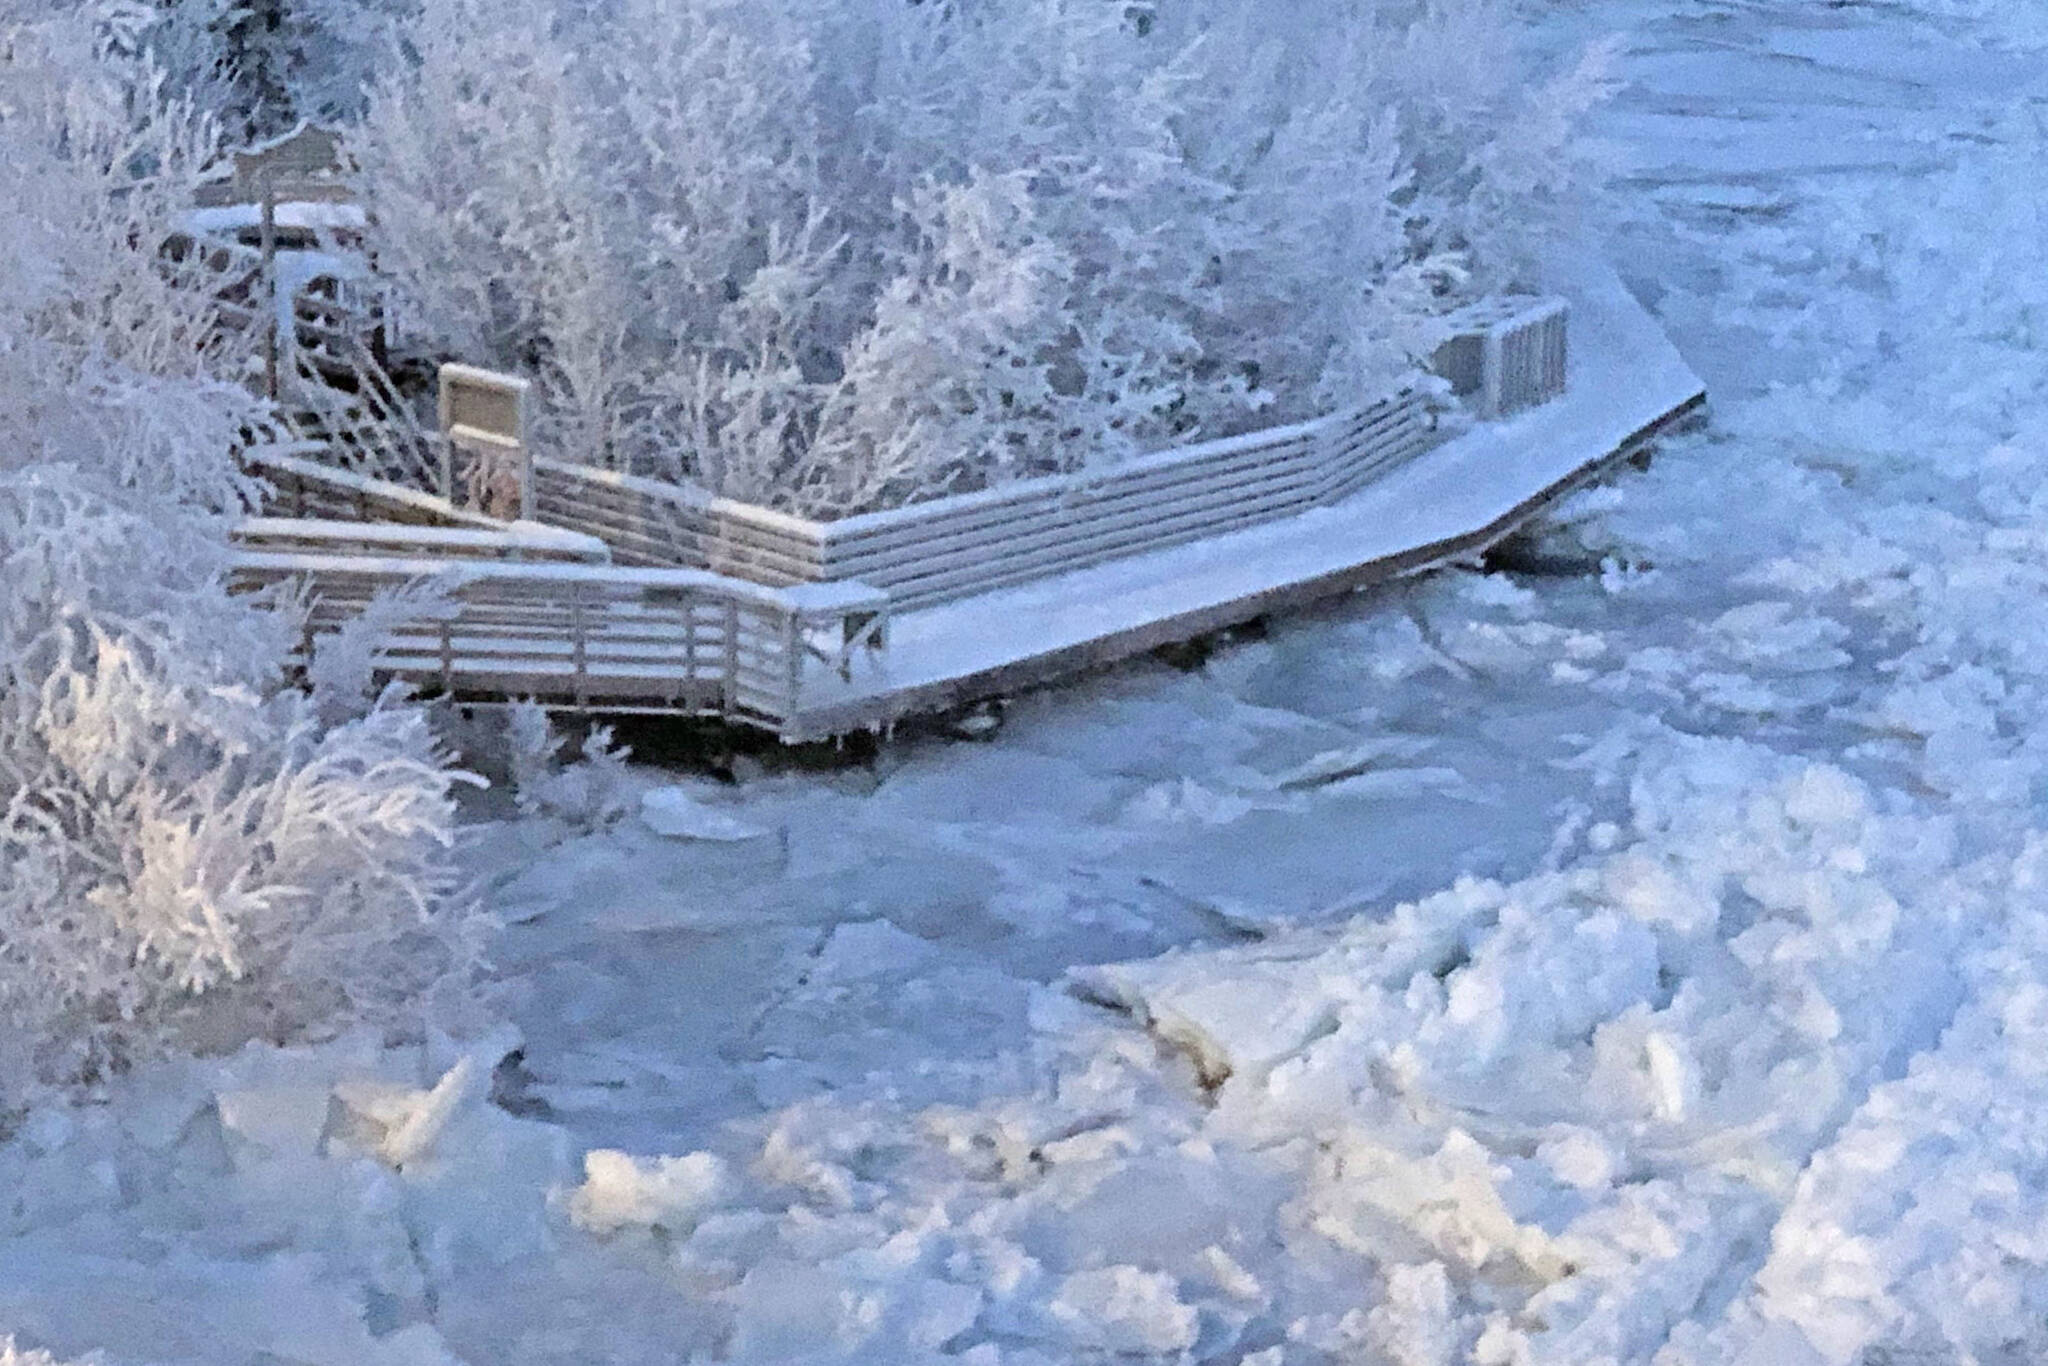 An ice jam in the Kenai River can be seen here from the Soldotna Bridge in this January 2020 photo. (Courtesy Dan Nelson/Kenai Peninsula Borough Office of Emergency Management)